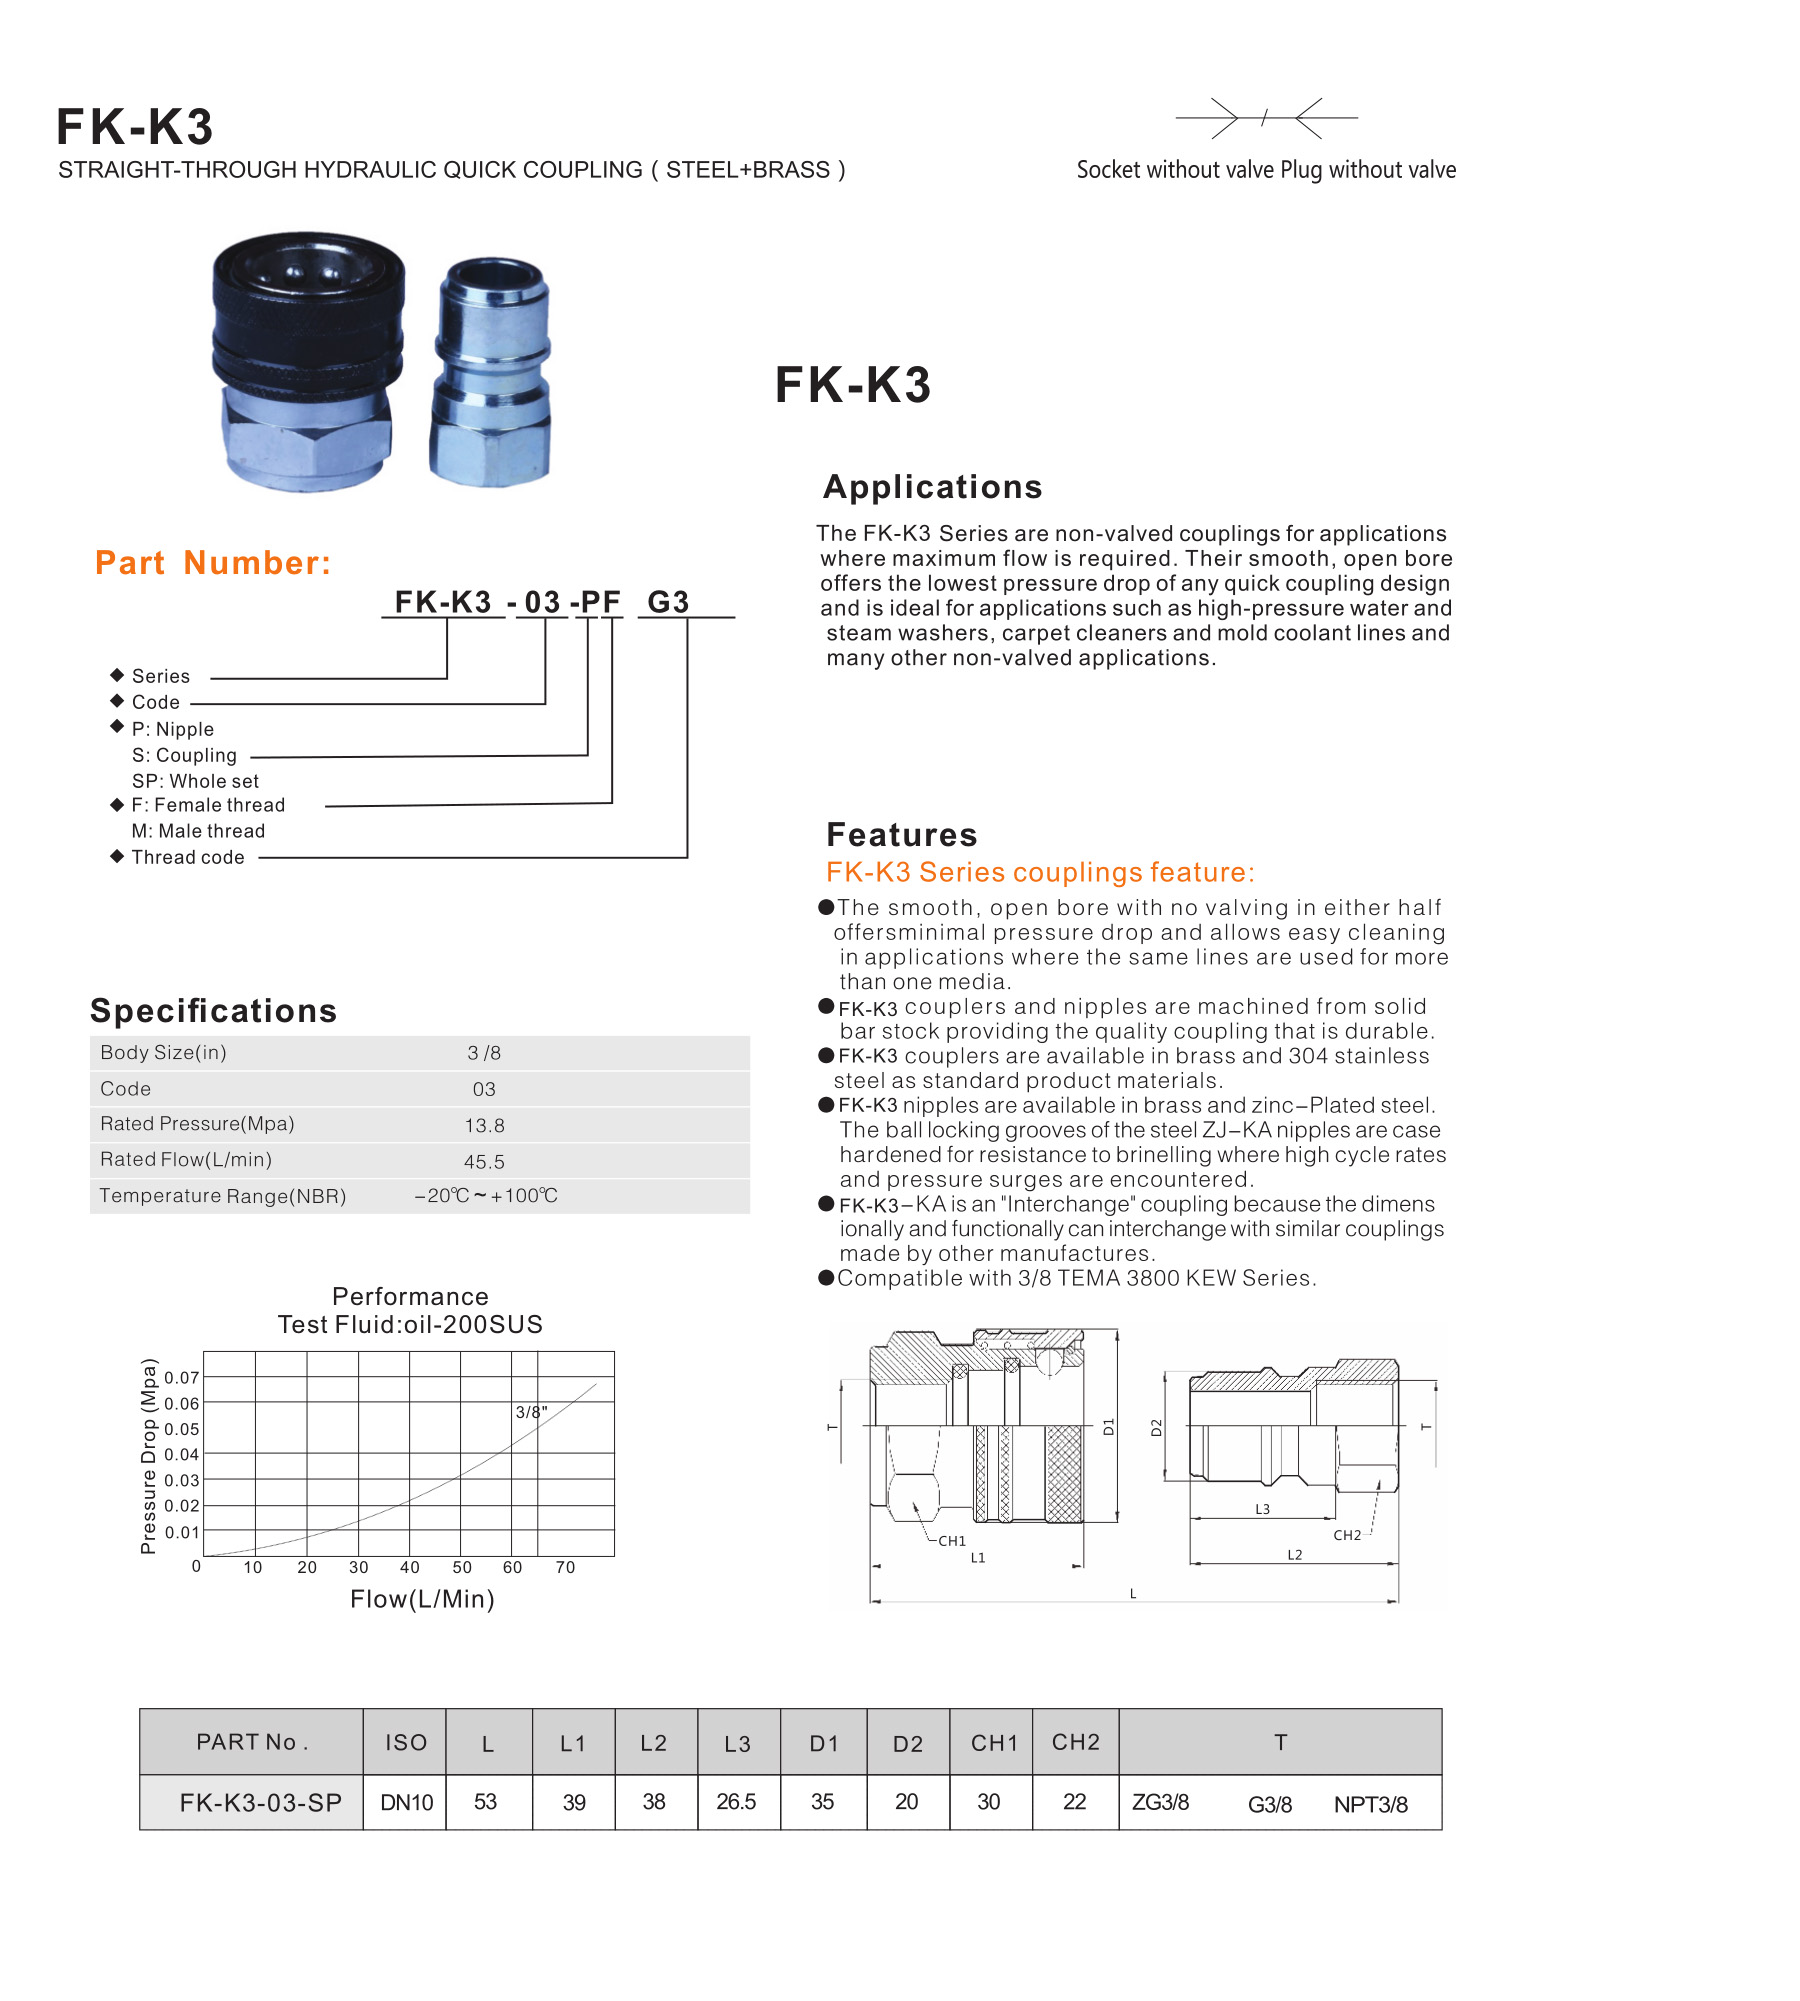 FK-K3 Series straight through hydraulic quick coupling